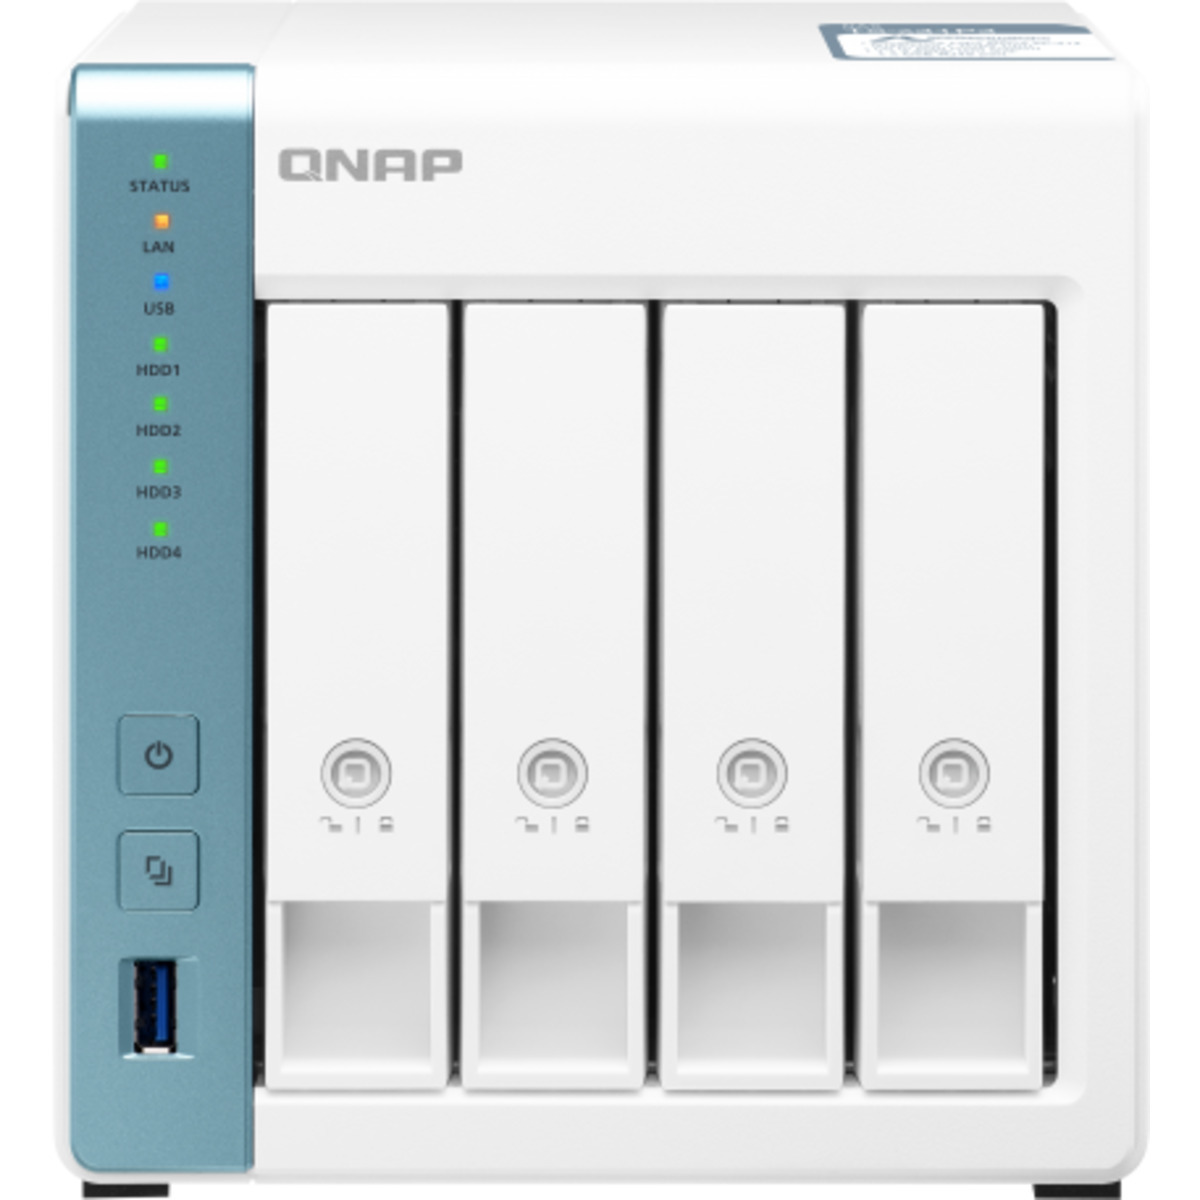 buy $1615 QNAP TS-431P3 32tb Desktop NAS - Network Attached Storage Device 4x8000gb Seagate EXOS ST8000NM000A 3.5 7200rpm SATA 6Gb/s HDD ENTERPRISE Class Drives Installed - Burn-In Tested - FREE RAM UPGRADE - nas headquarters buy network attached storage server device das new raid-5 free shipping usa christmas new year holiday sale TS-431P3